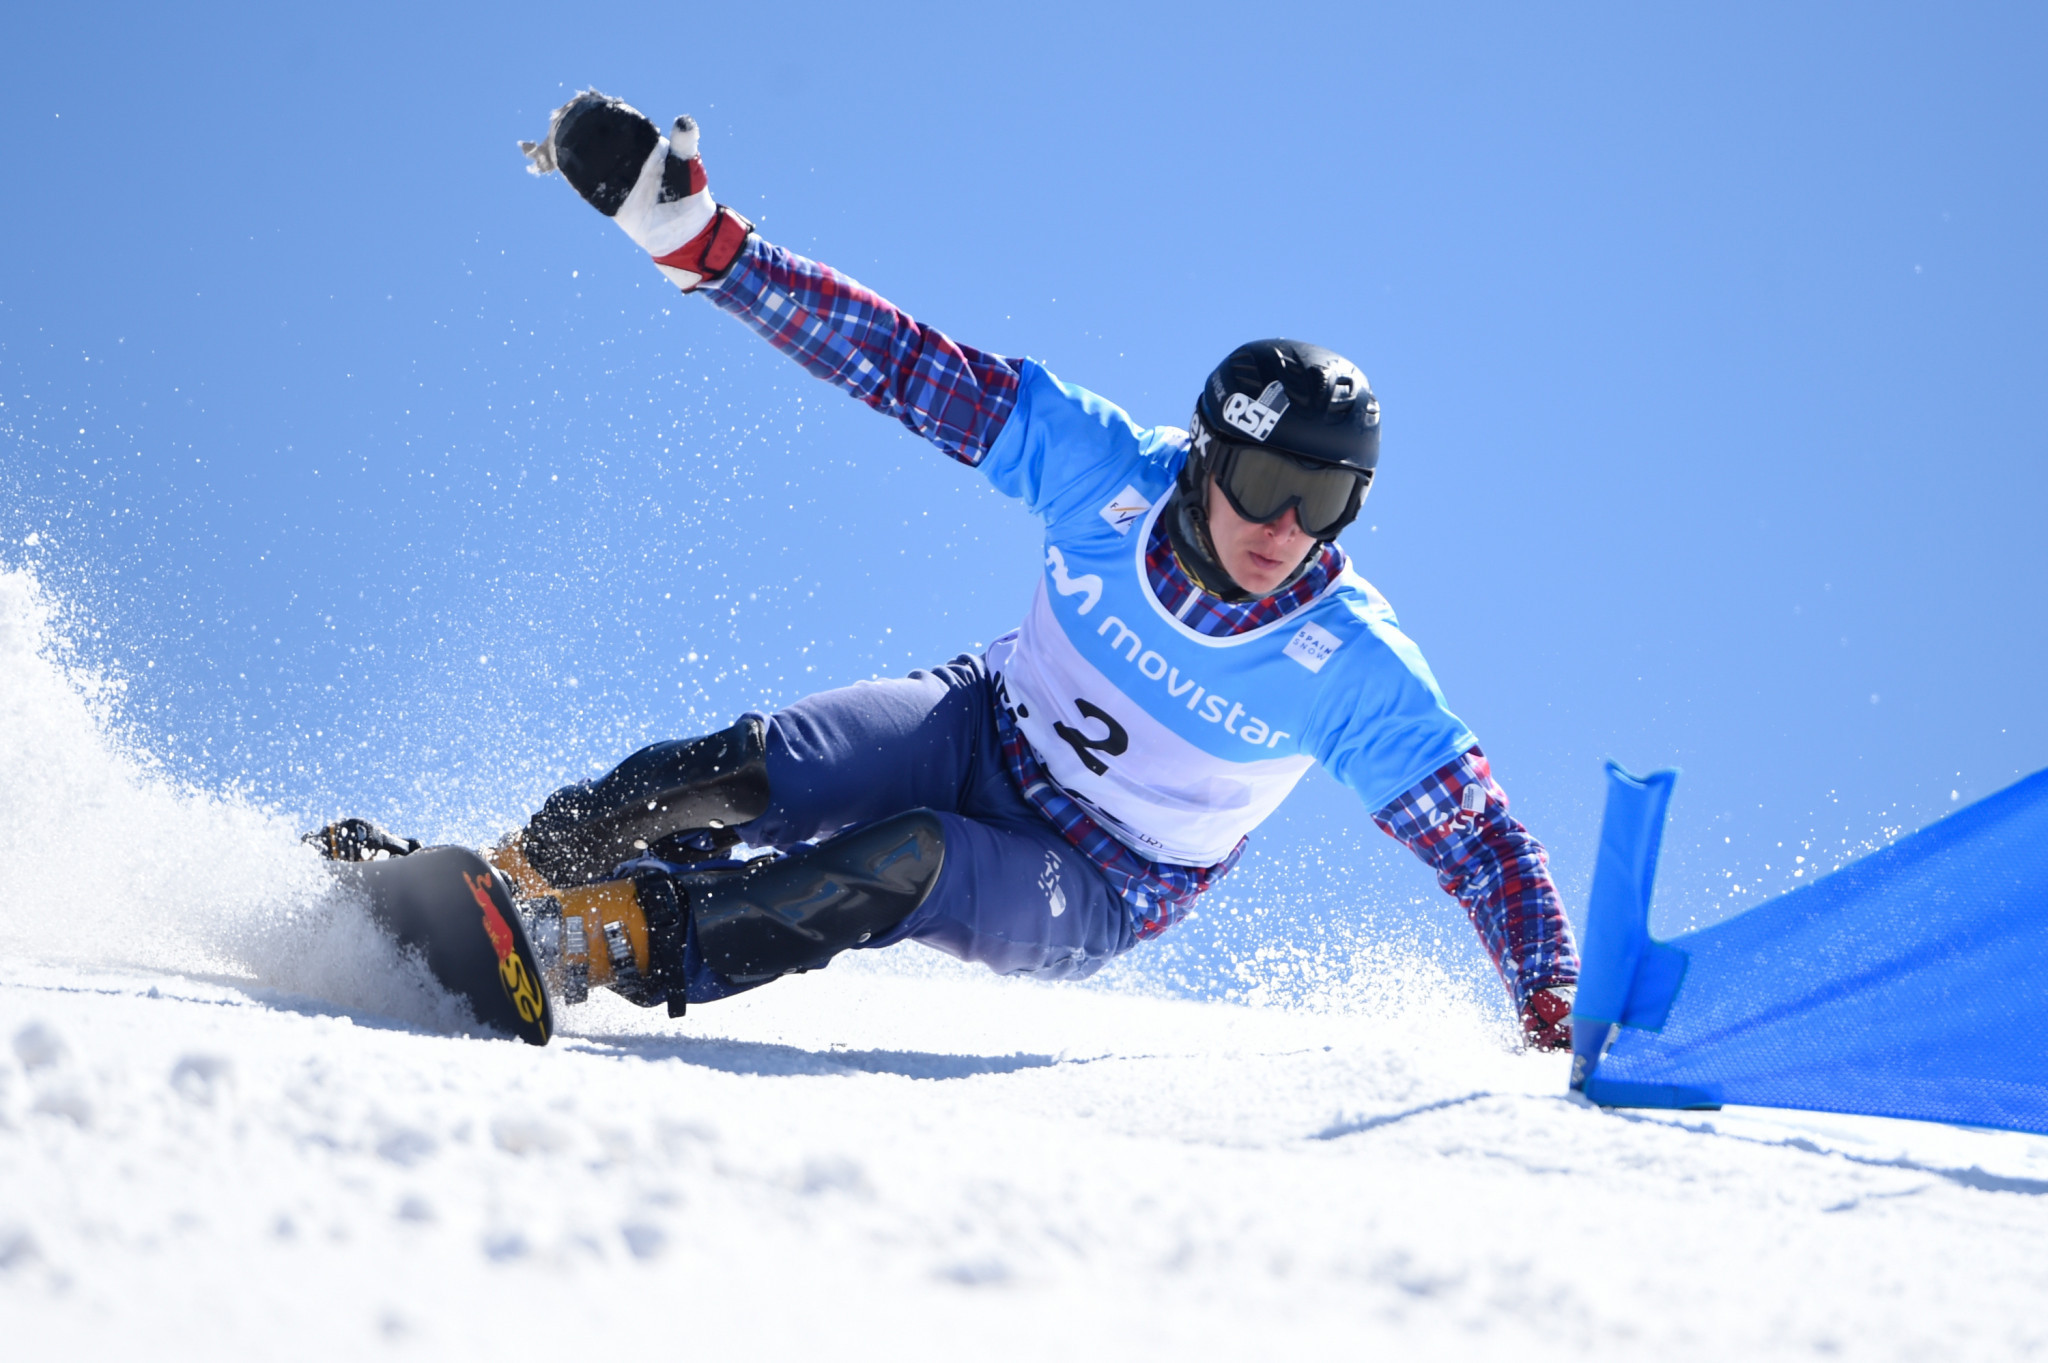 Double Russian gold at final parallel giant slalom race of Snowboard World Cup season